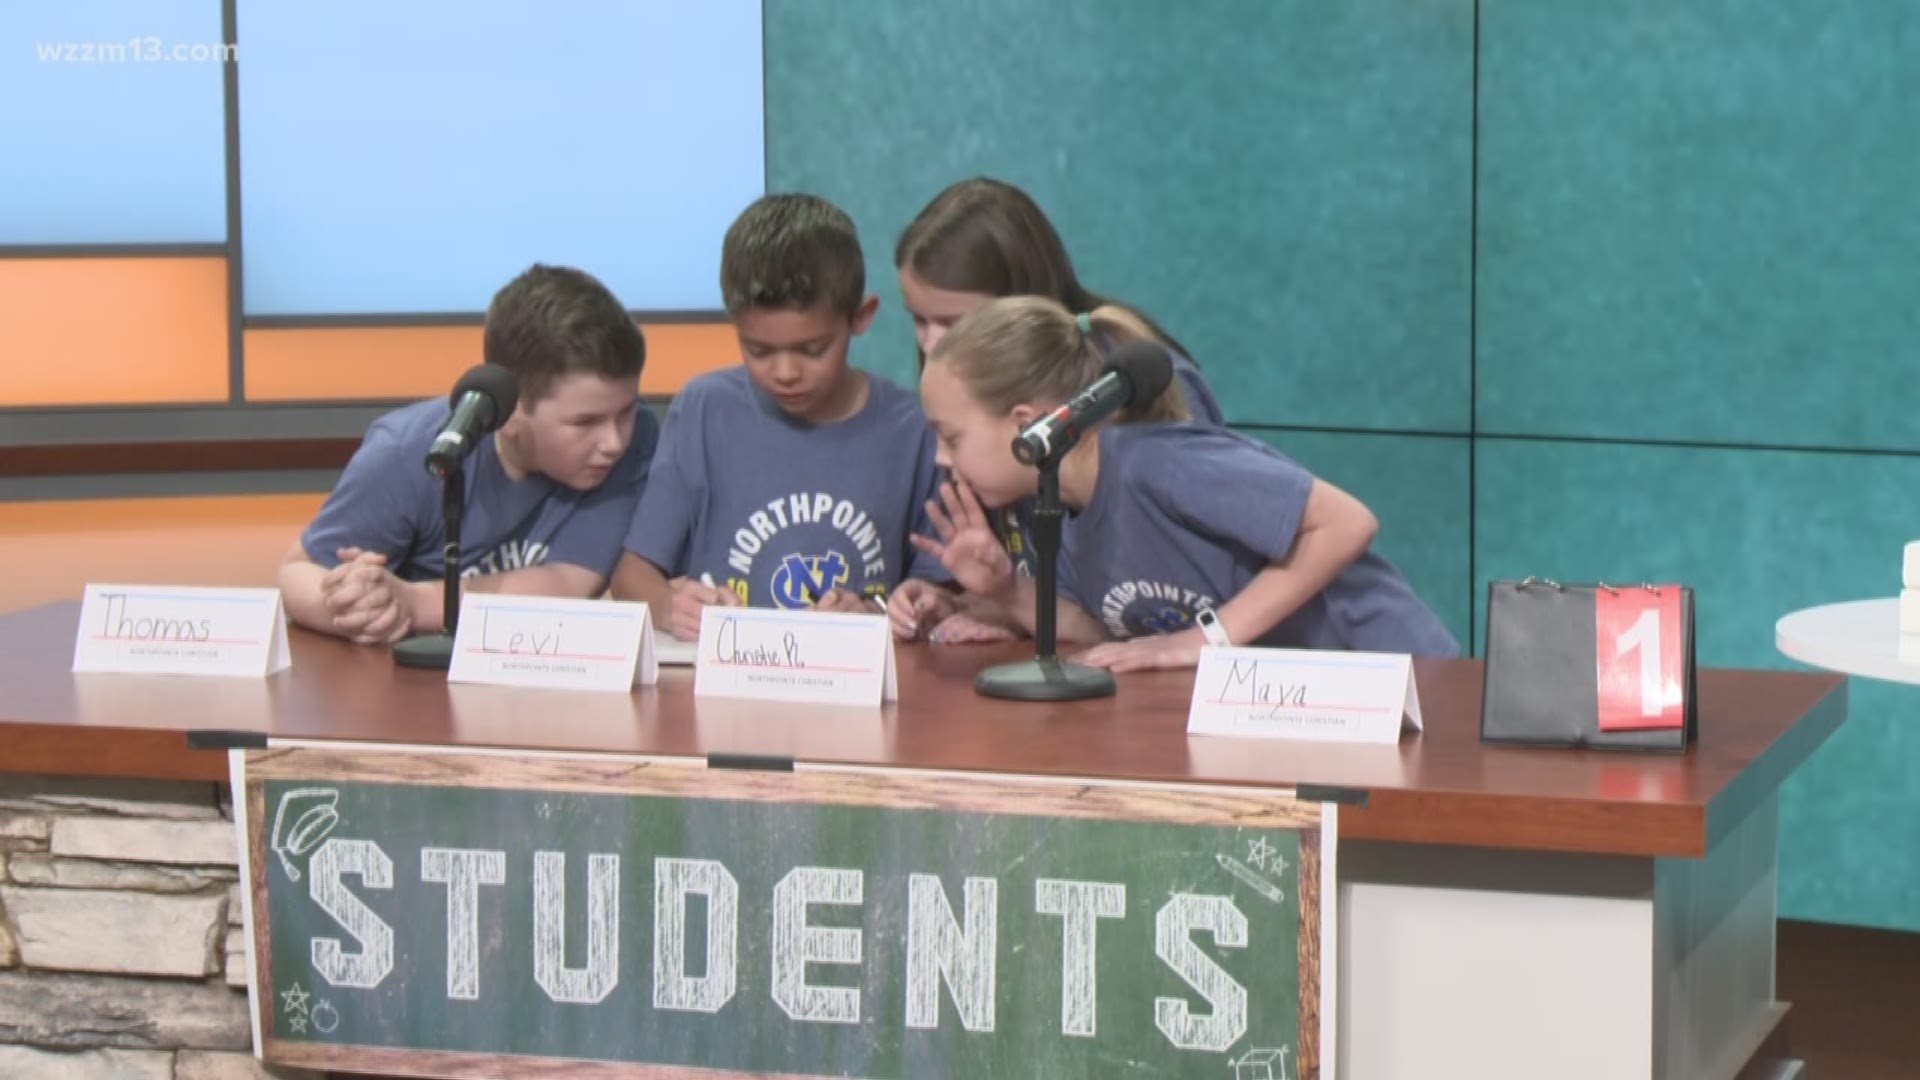 A team of 5th graders from Northpointe Christians puts the educational smackdown on 13 ON YOUR SIDE's morning anchors.